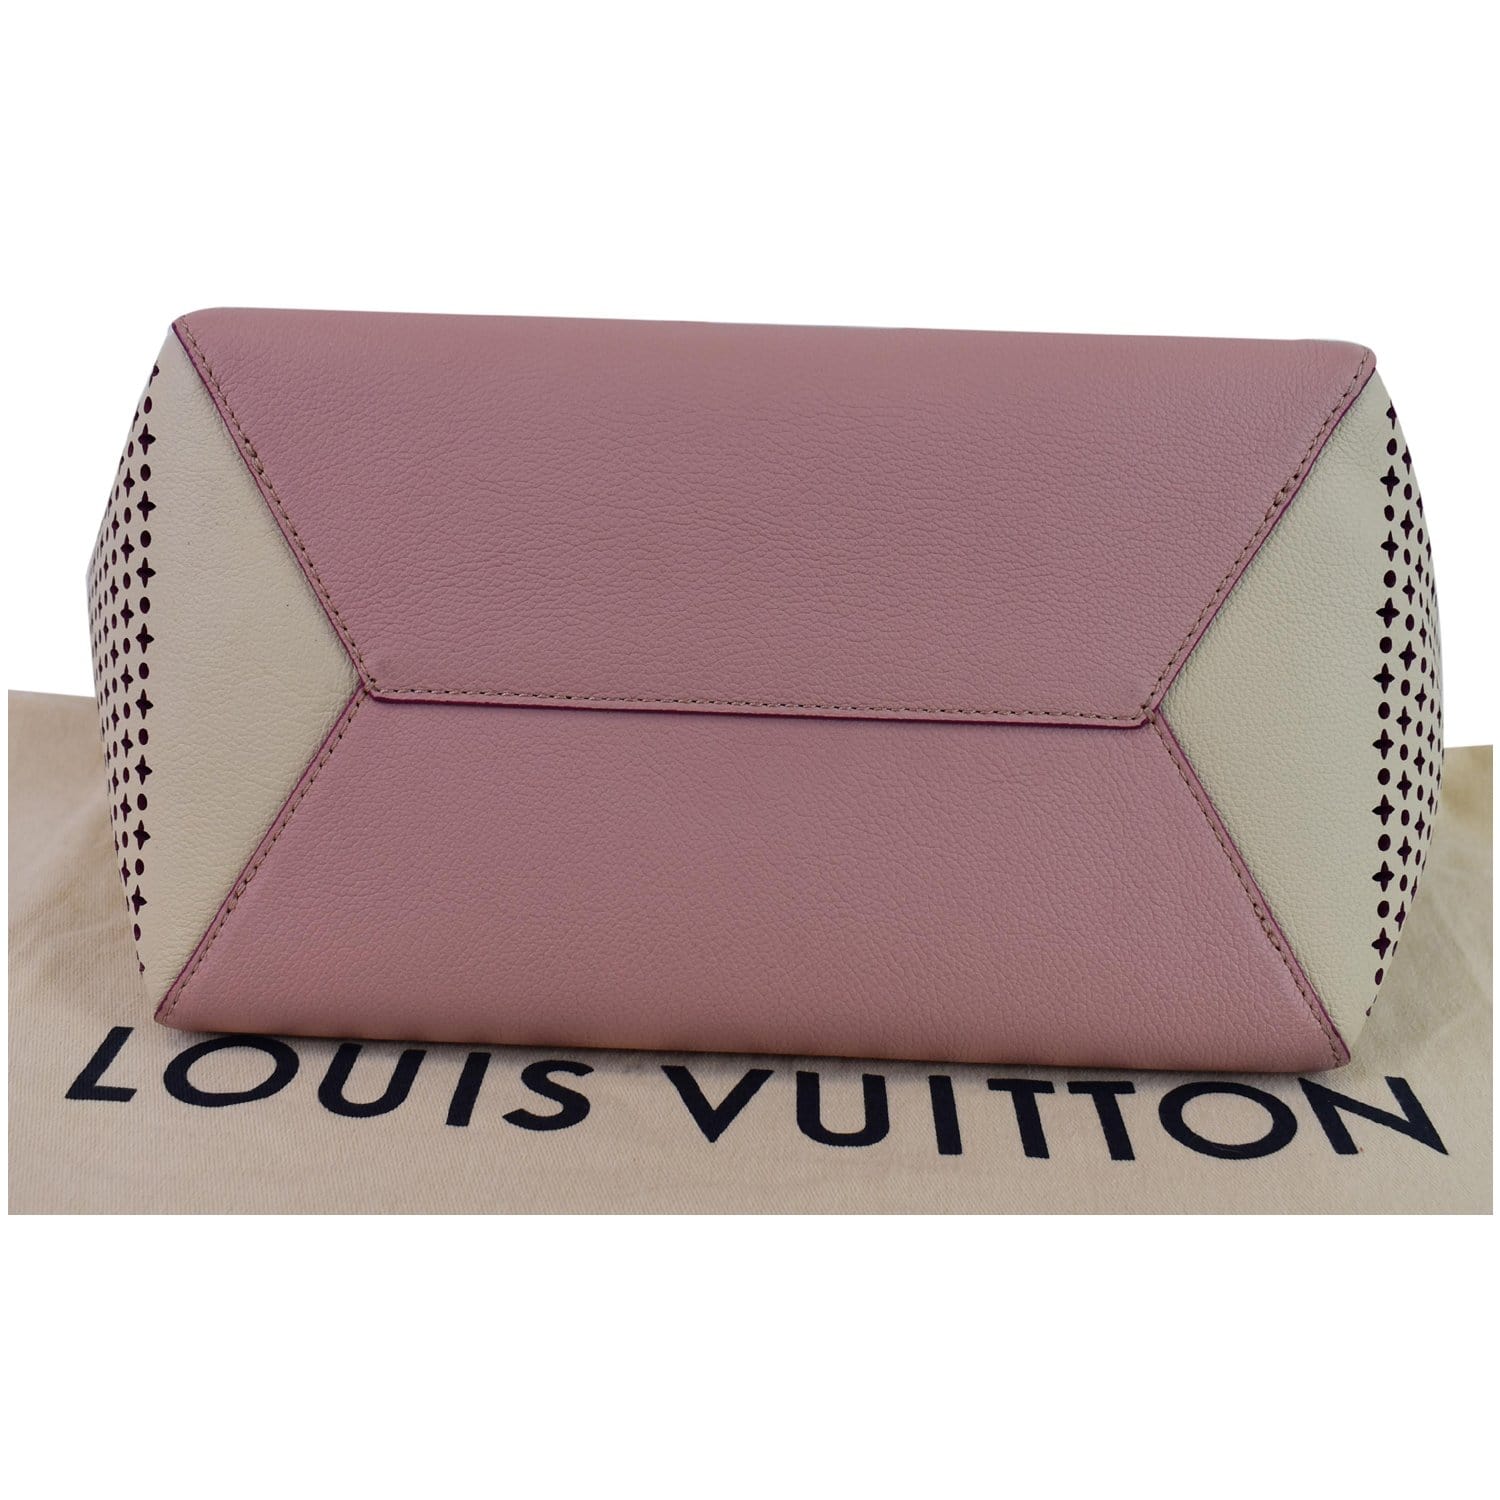 This Louis Vuitton Pink Lockme Cabas Tote is too pretty💗😍 Get it now